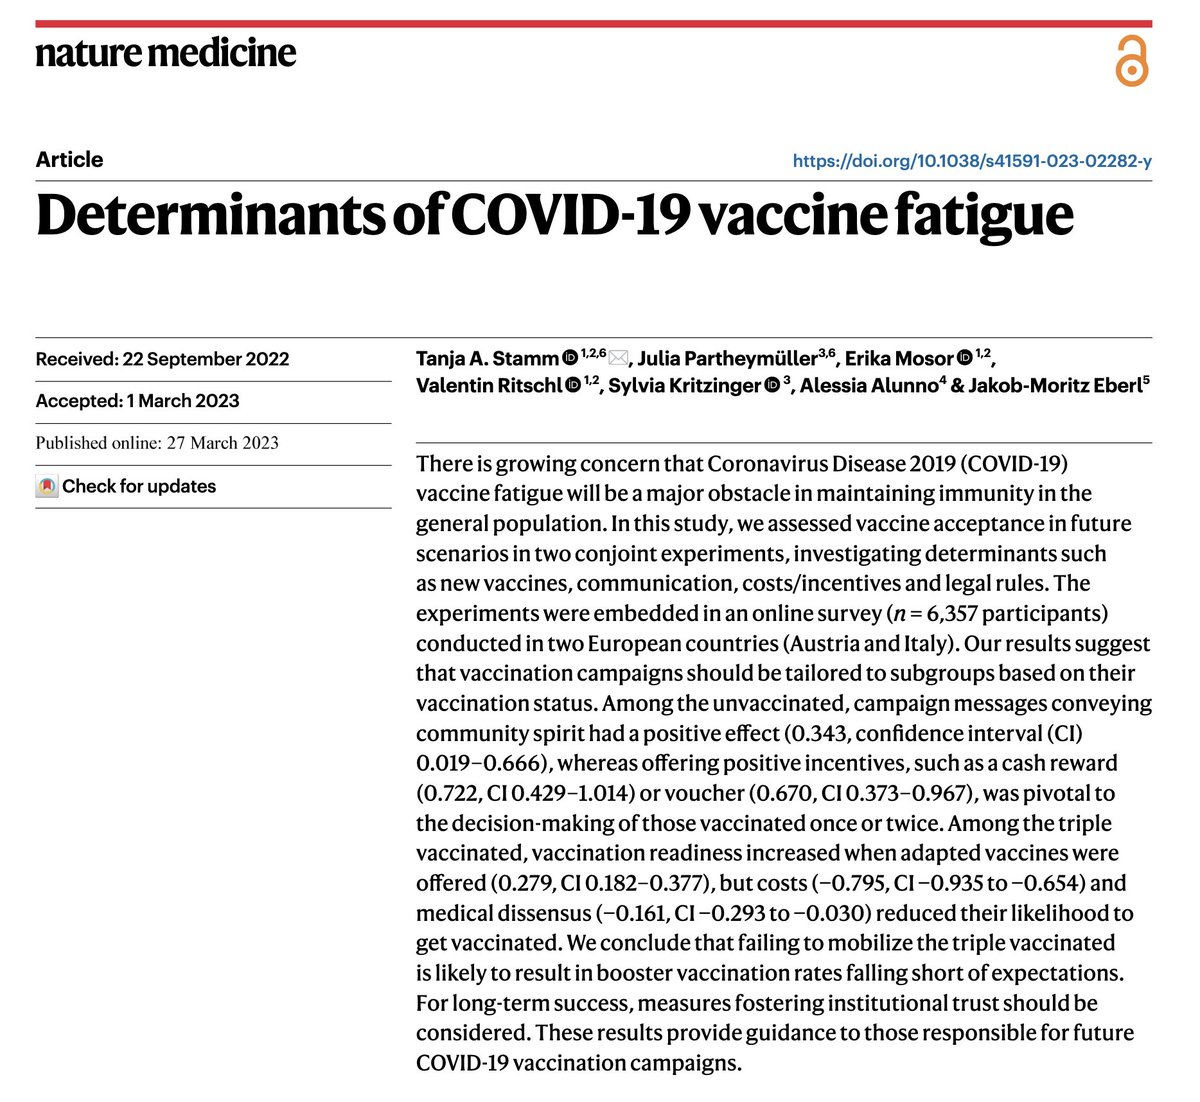 🚨New study published in @NatureMedicine on #COVID19 vaccine fatigue and its implications for long-term pandemic management. w/ @StammTanja, @schnizzl, E. Mosor, V. Ritschl, S. Kritzinger, A. Alunno & myself. A thread 1/12 nature.com/articles/s4159…